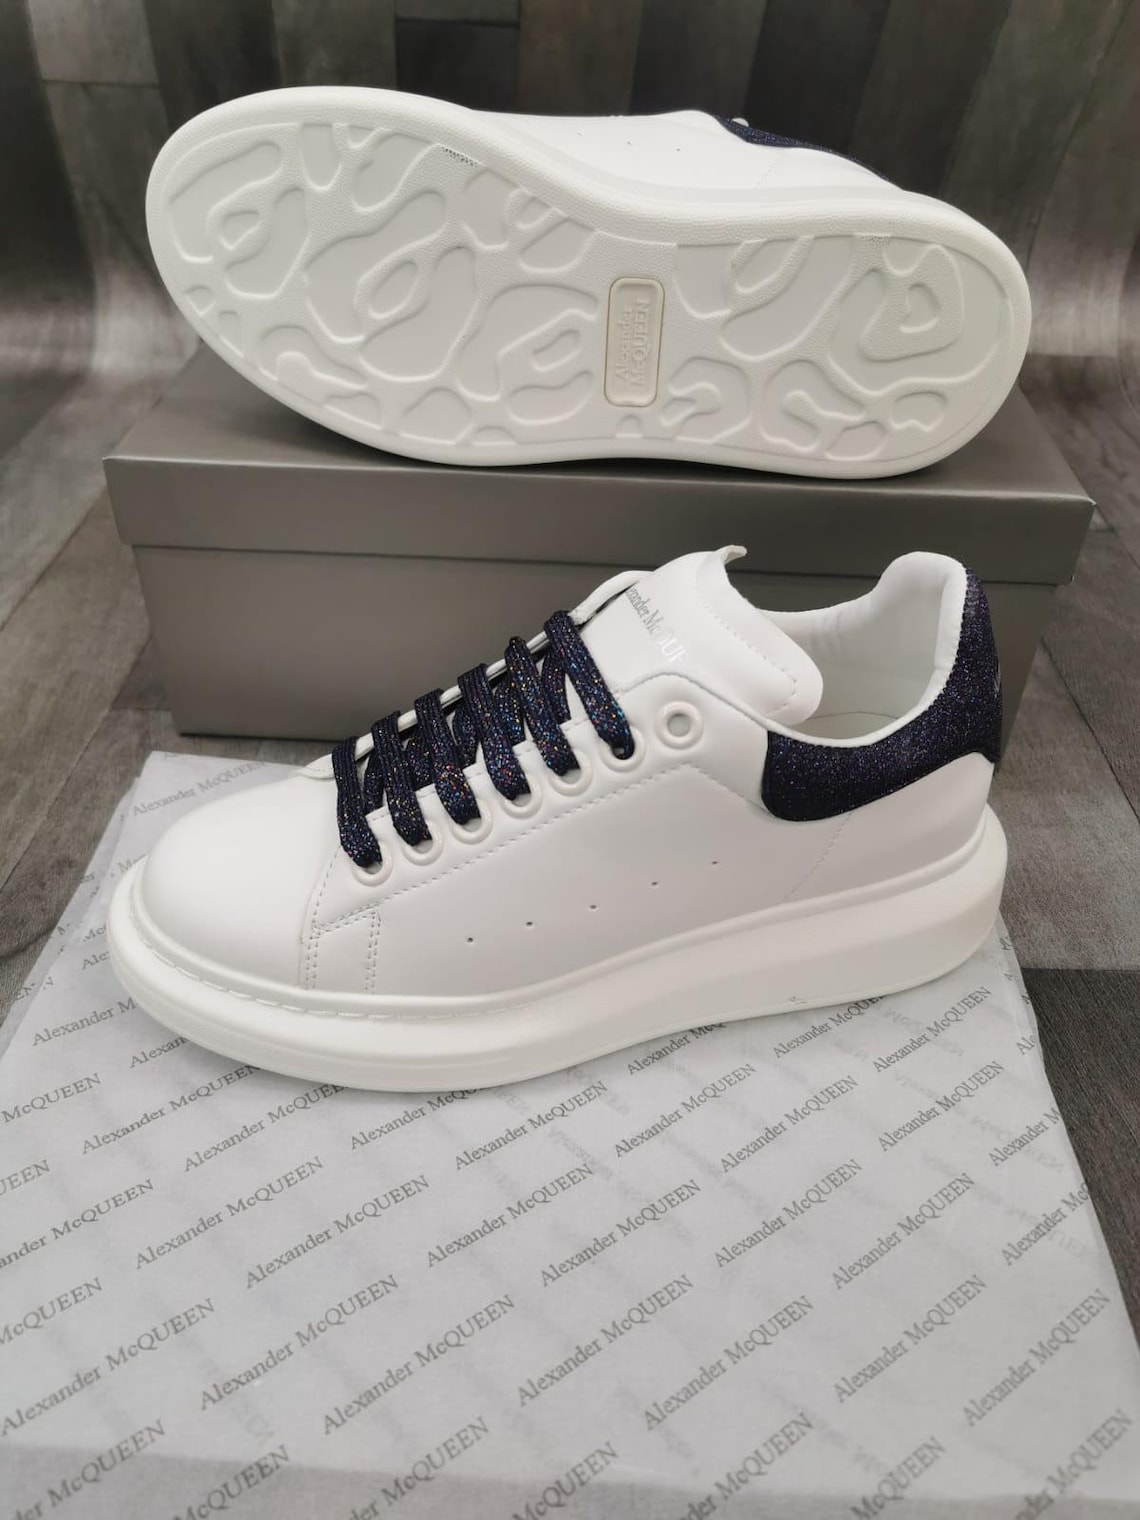 Alexander McQueen Sneakers Available in Uk Sizes | Etsy